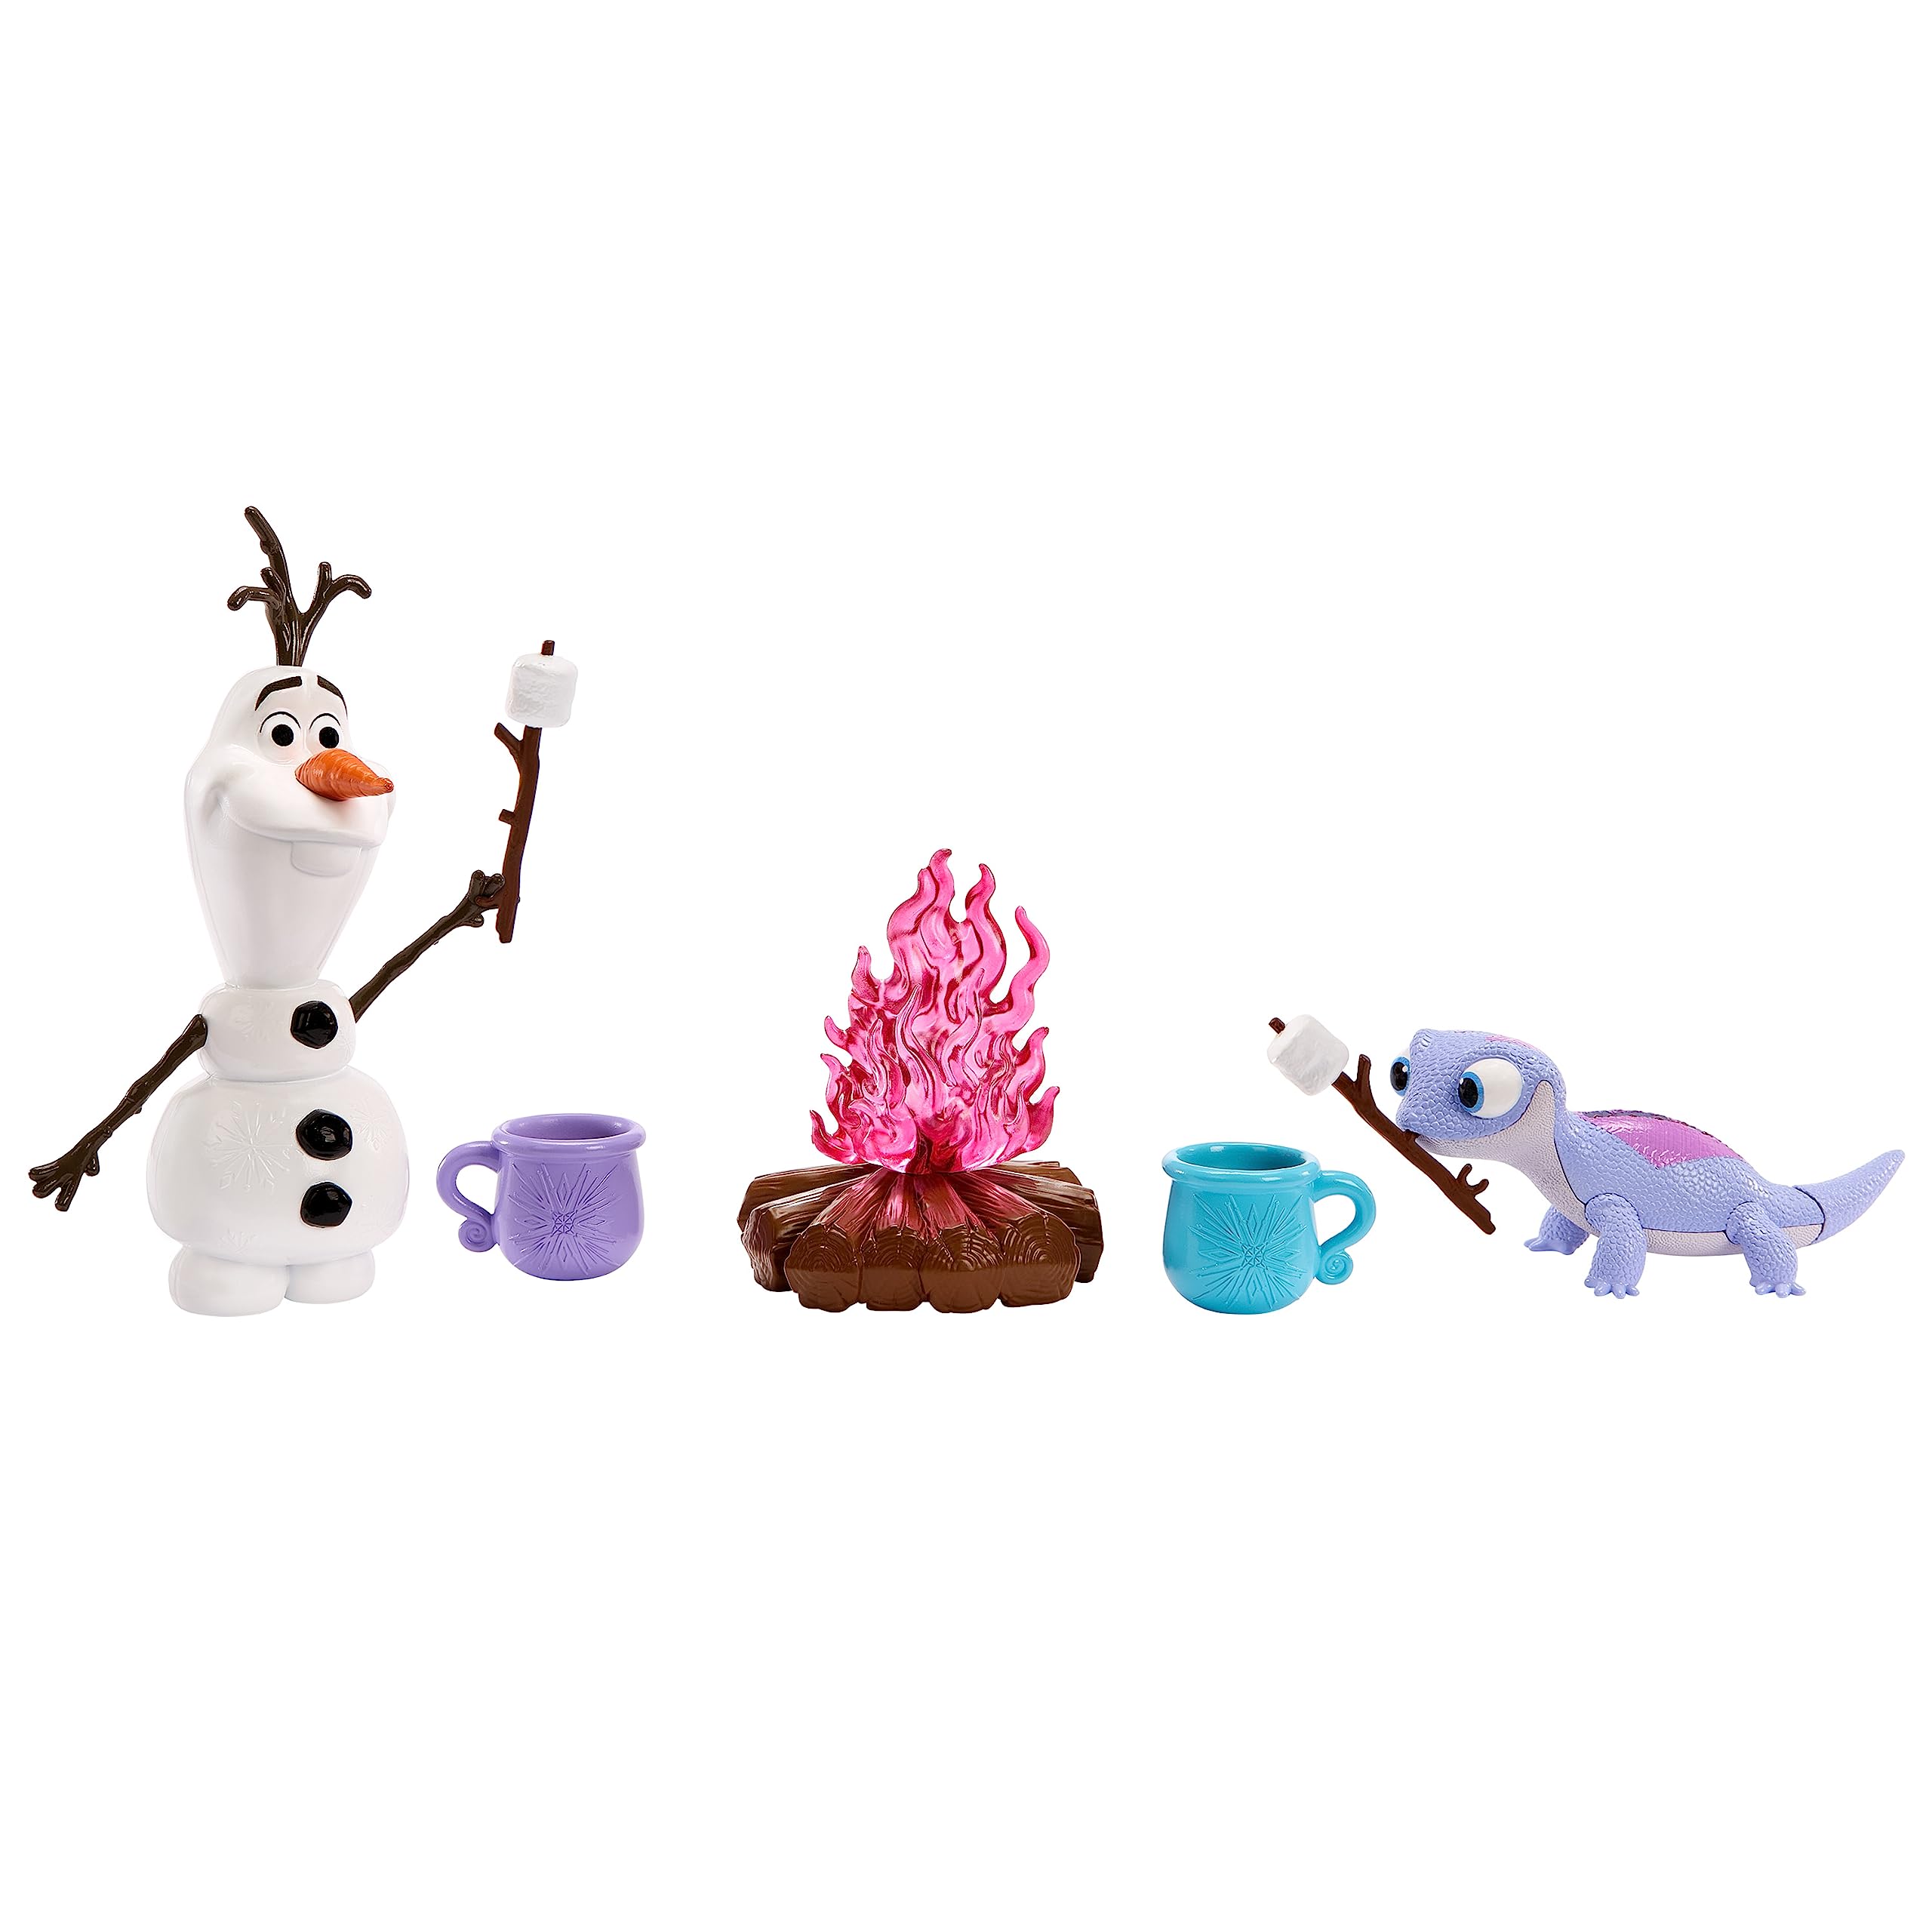 Disney Frozen Forest Adventures Gift Set with 2 Dolls, 2 Friend Figures and 12 Camping Accessories, Includes Elsa and Anna Dolls (Amazon Exclusive)